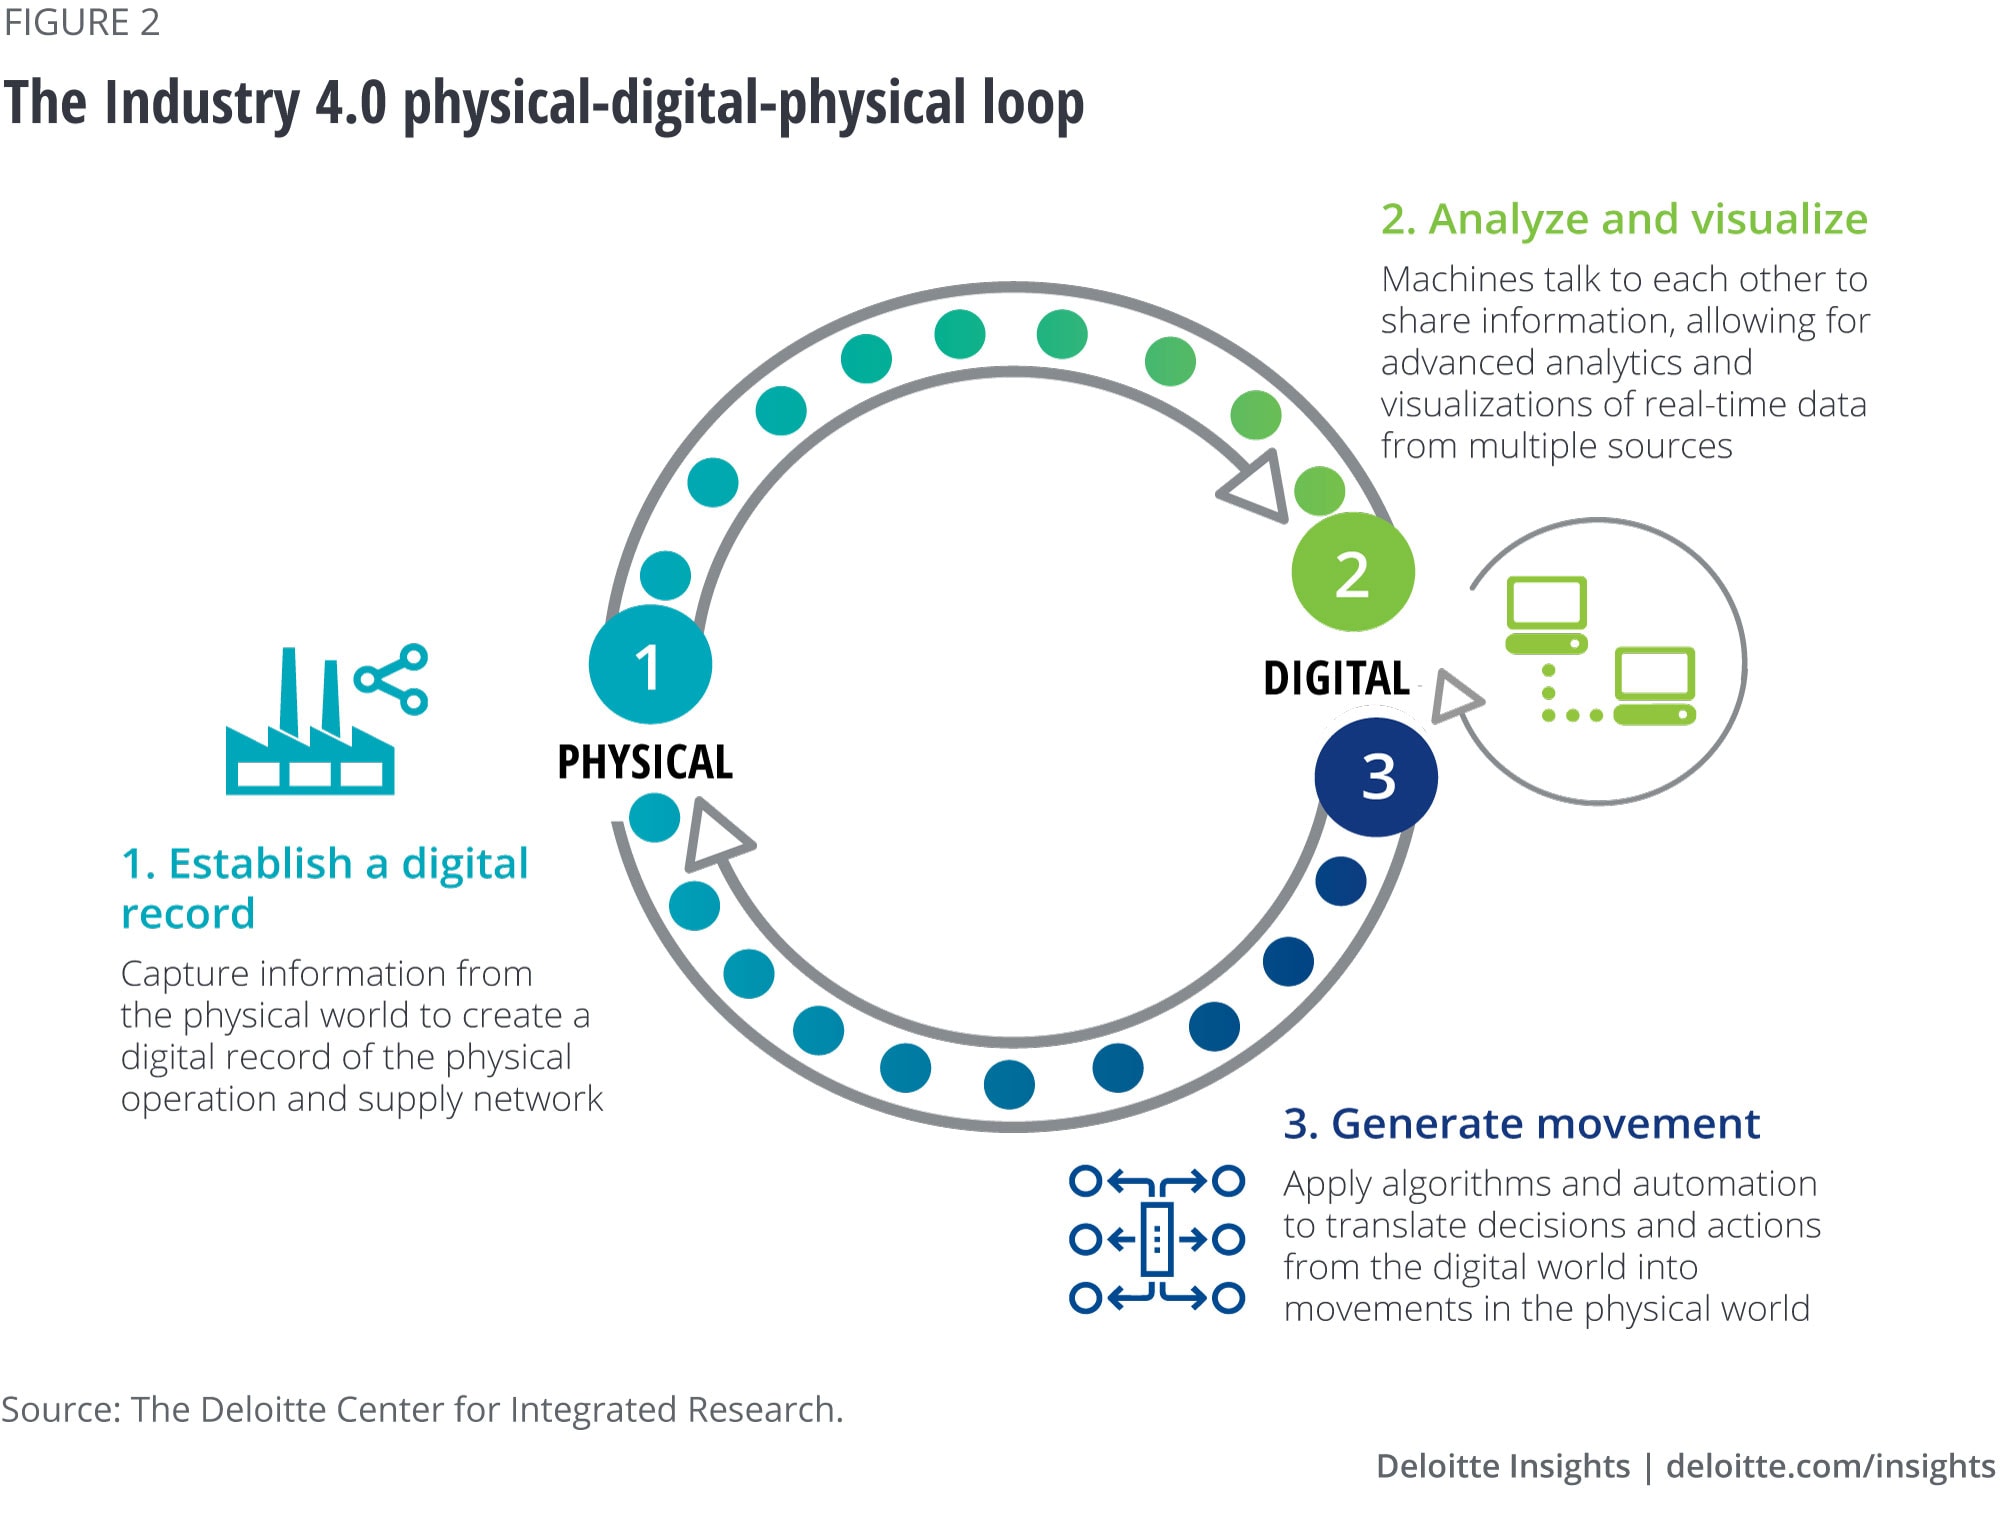 The Industry 4.0 physical-digital-physical loop